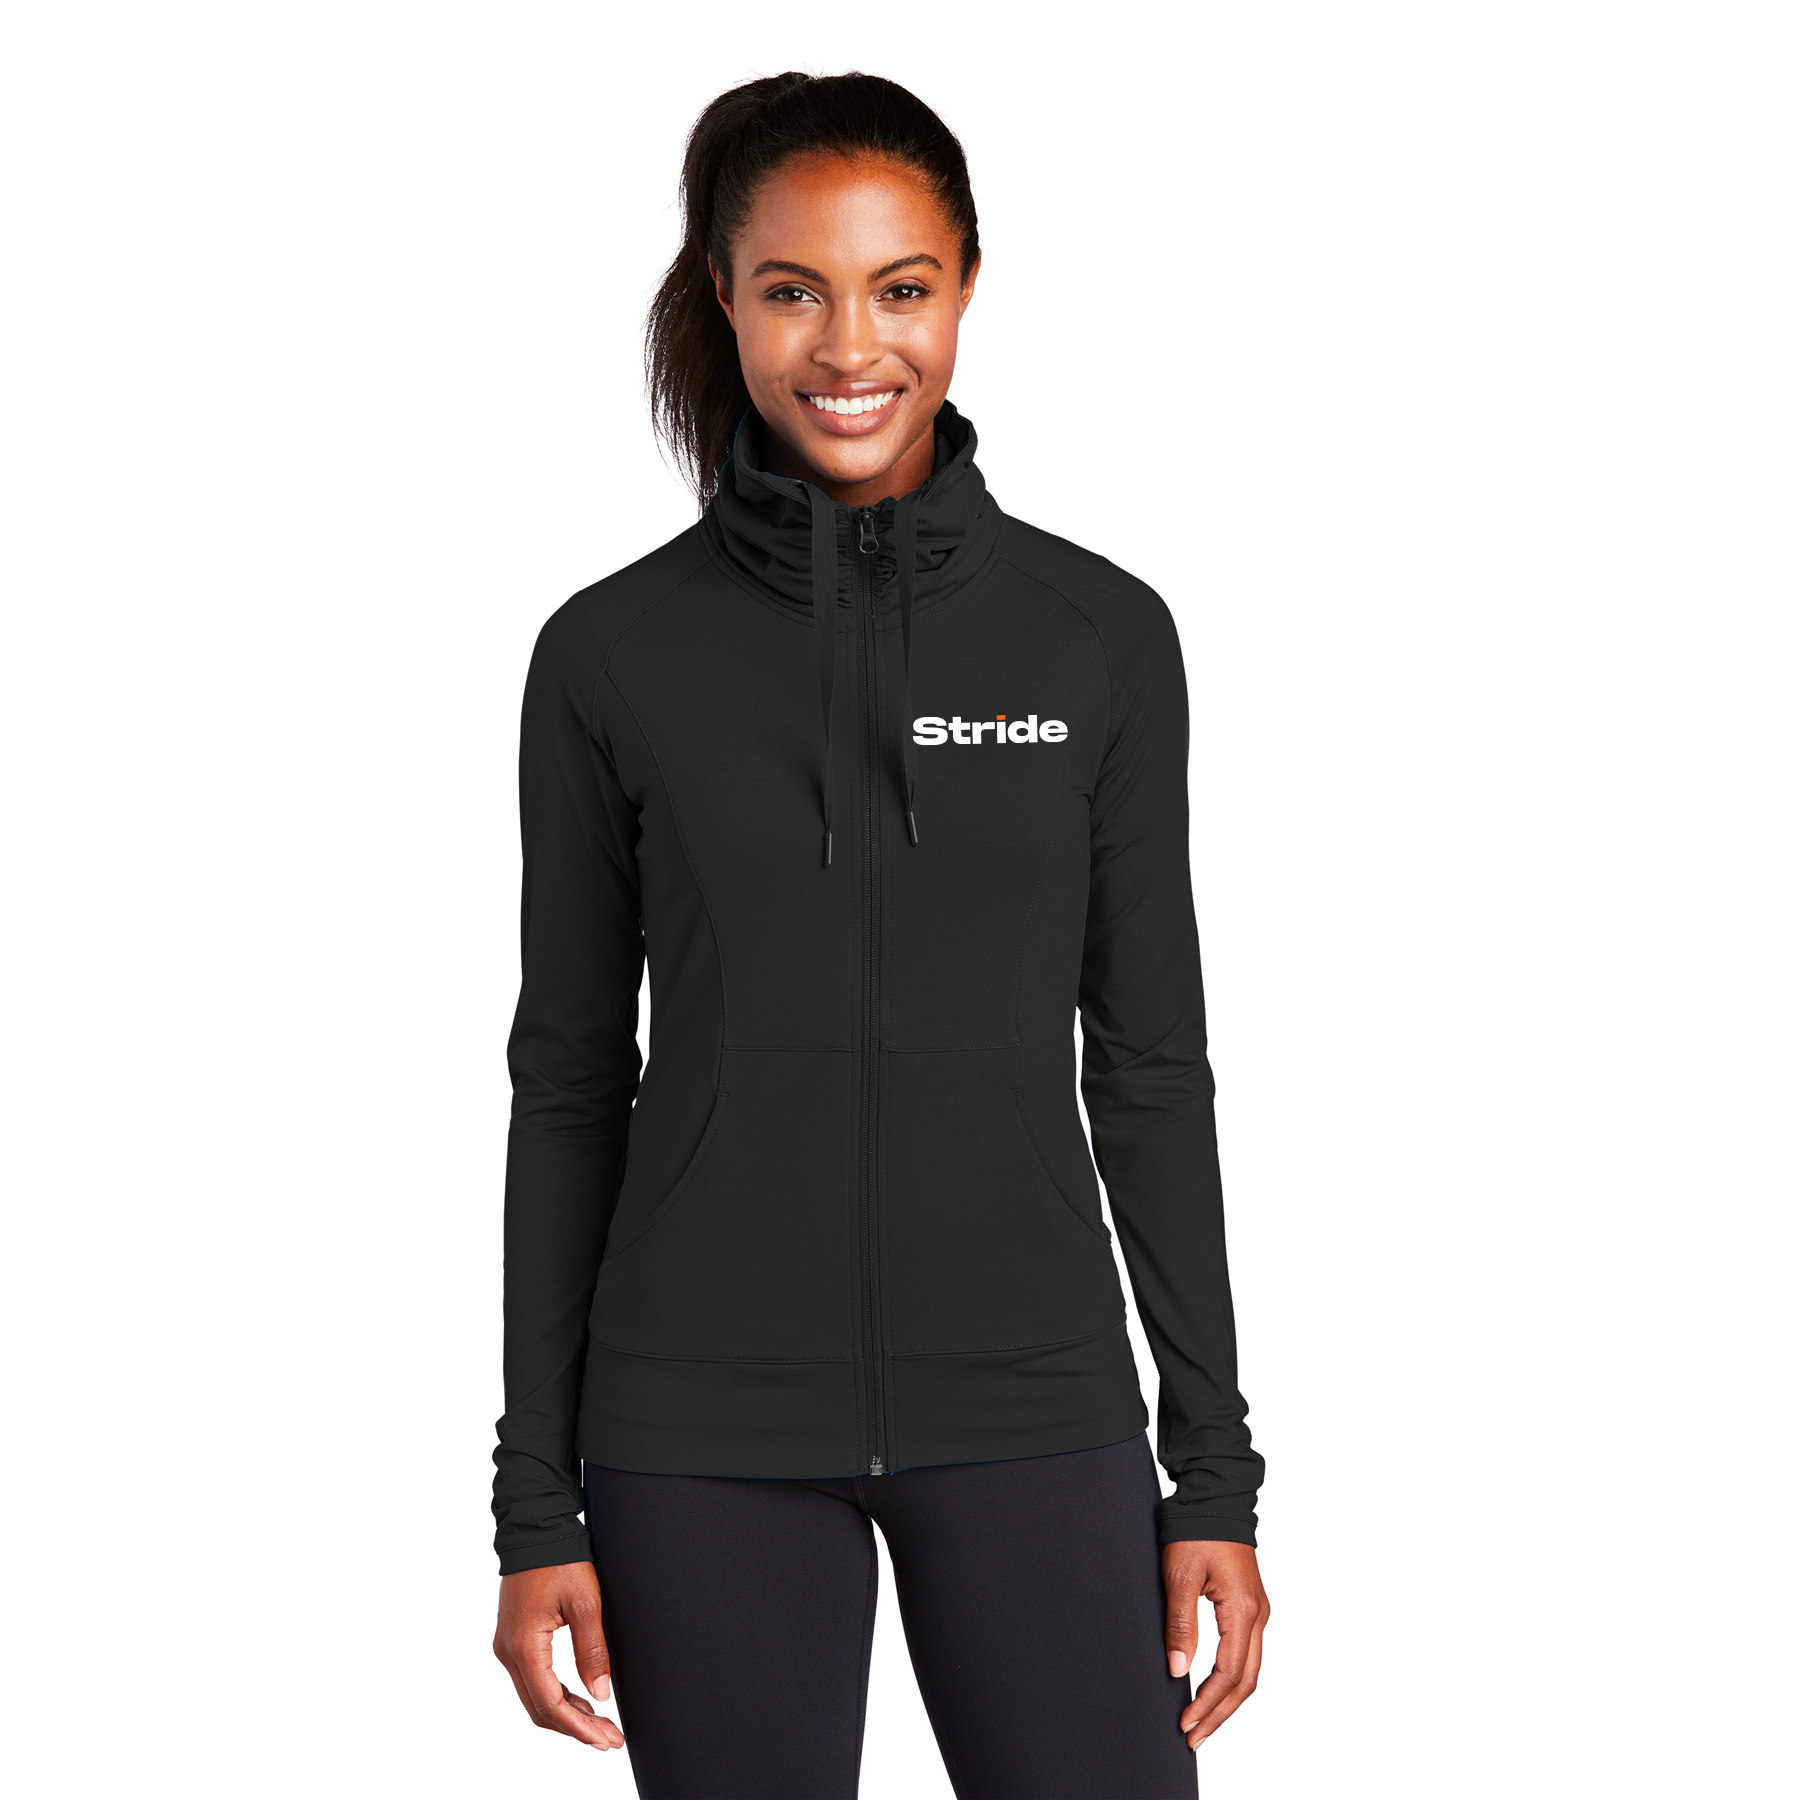 STRIDE EMBROIDERED SPORT-WICK STRETCH FULL-ZIP JACKET